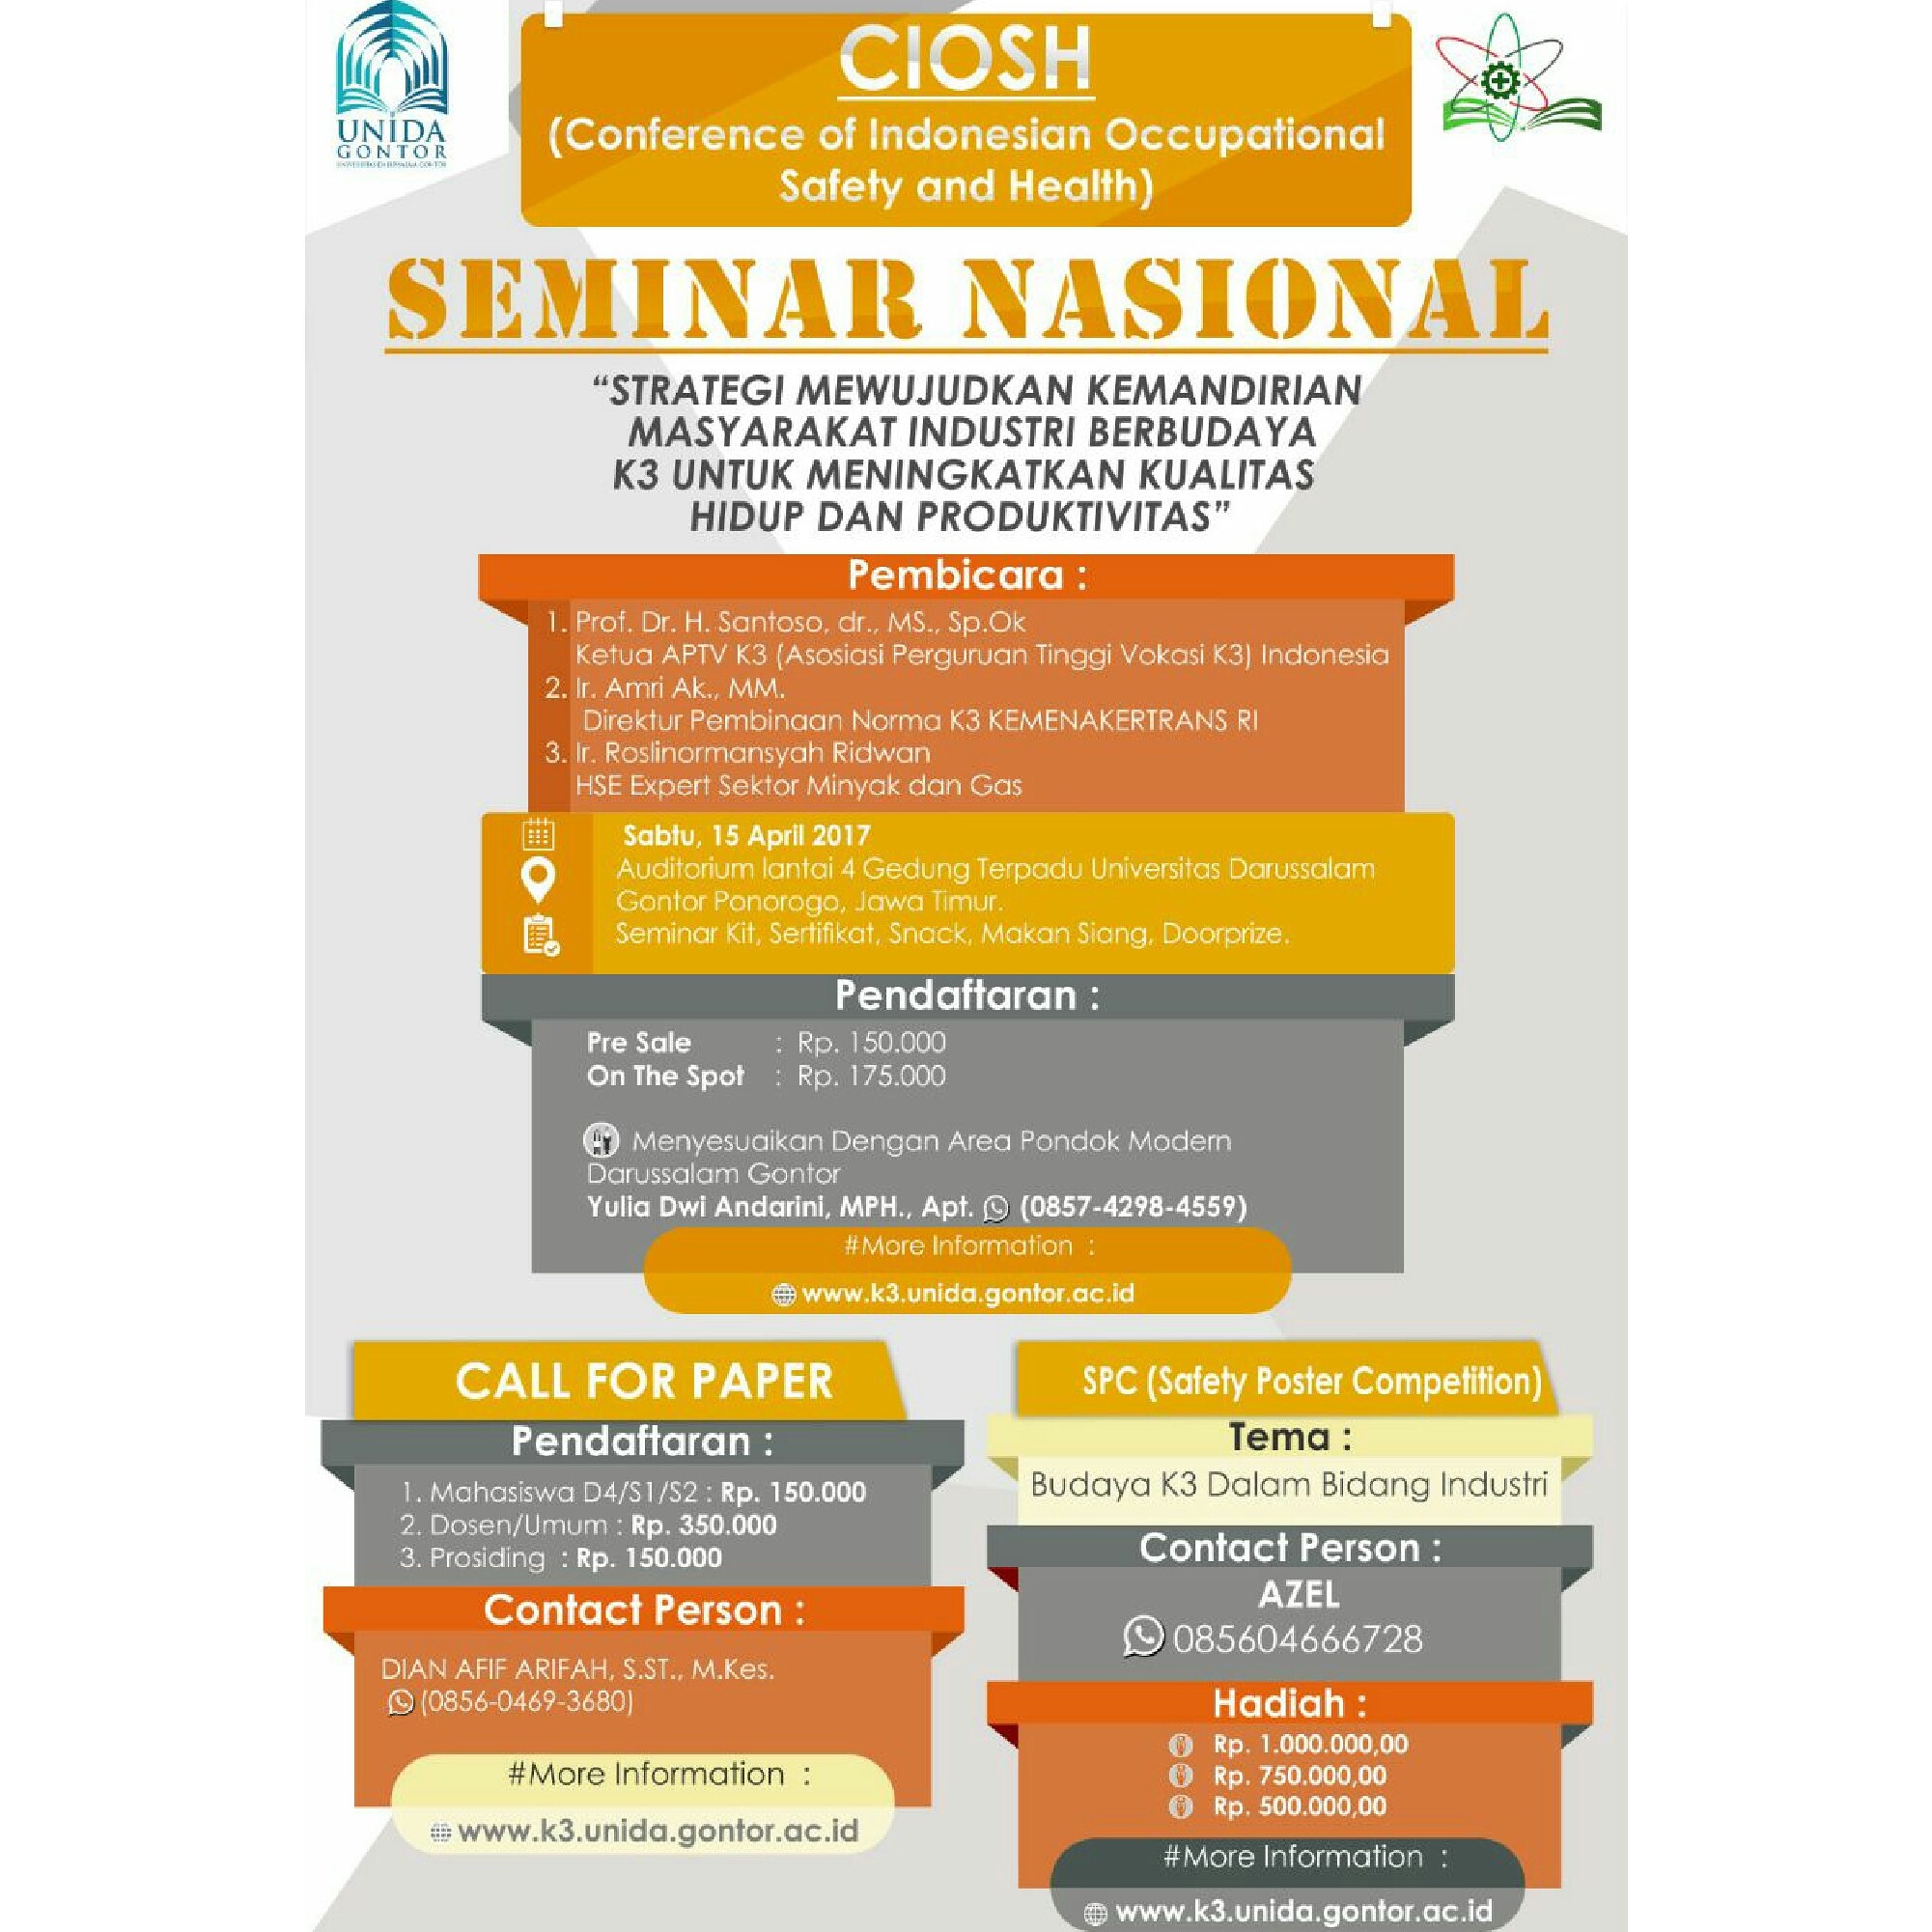 Conference of Indonesian Occupational Safety and Health (CIOSH)- SEMINAR NASIONAL